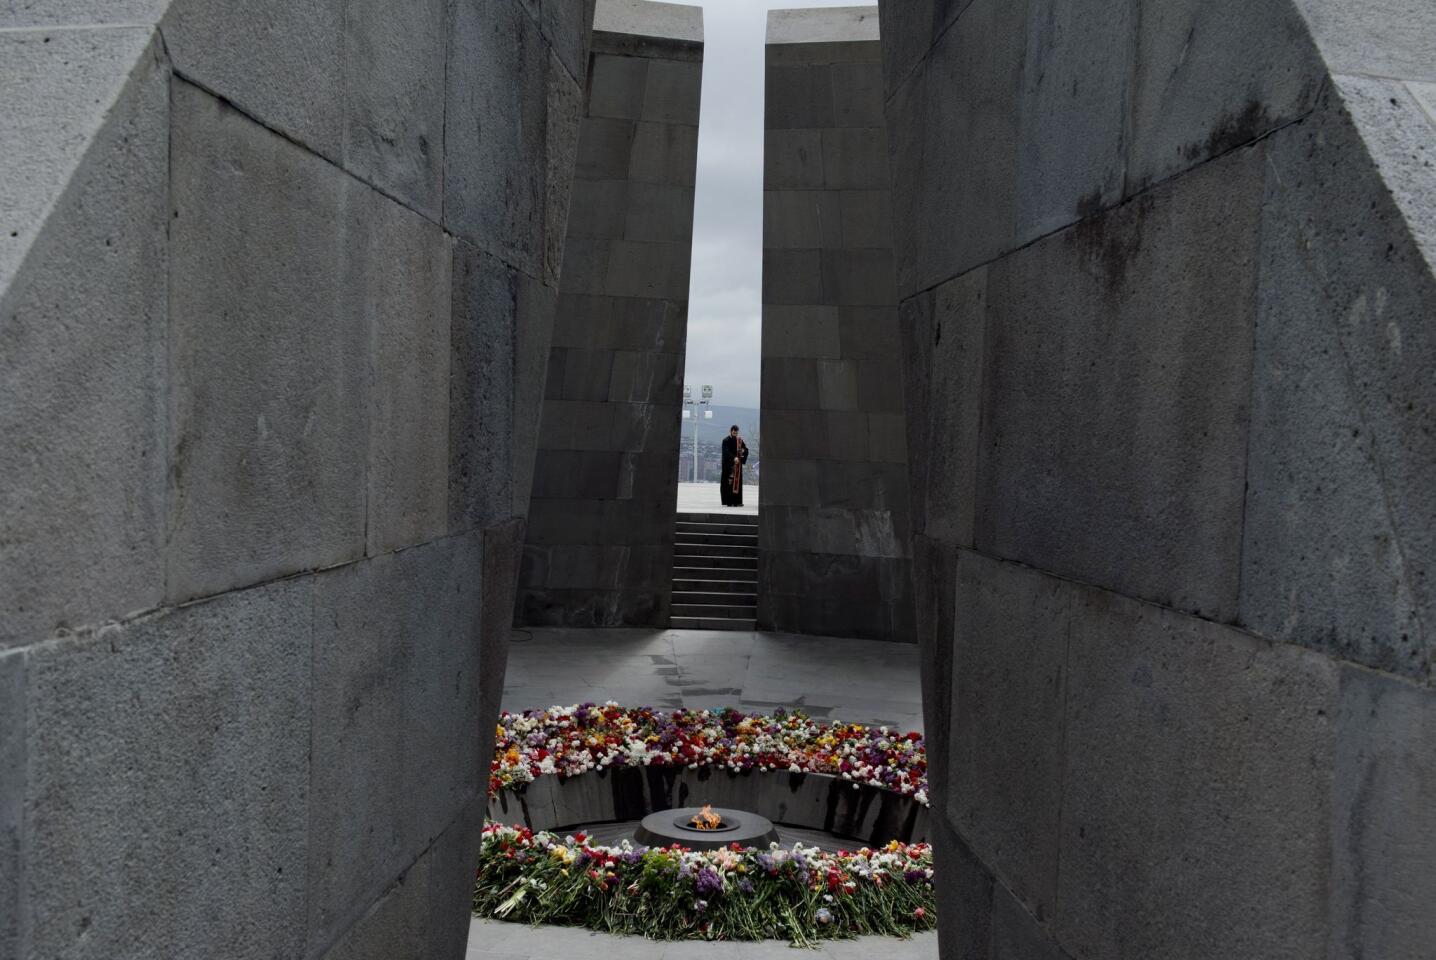 A clergyman of the Orthodox church walks toward the eternal flame during a ceremony April 24, 2015, at the Genocide Memorial in Yerevan, Armenia.